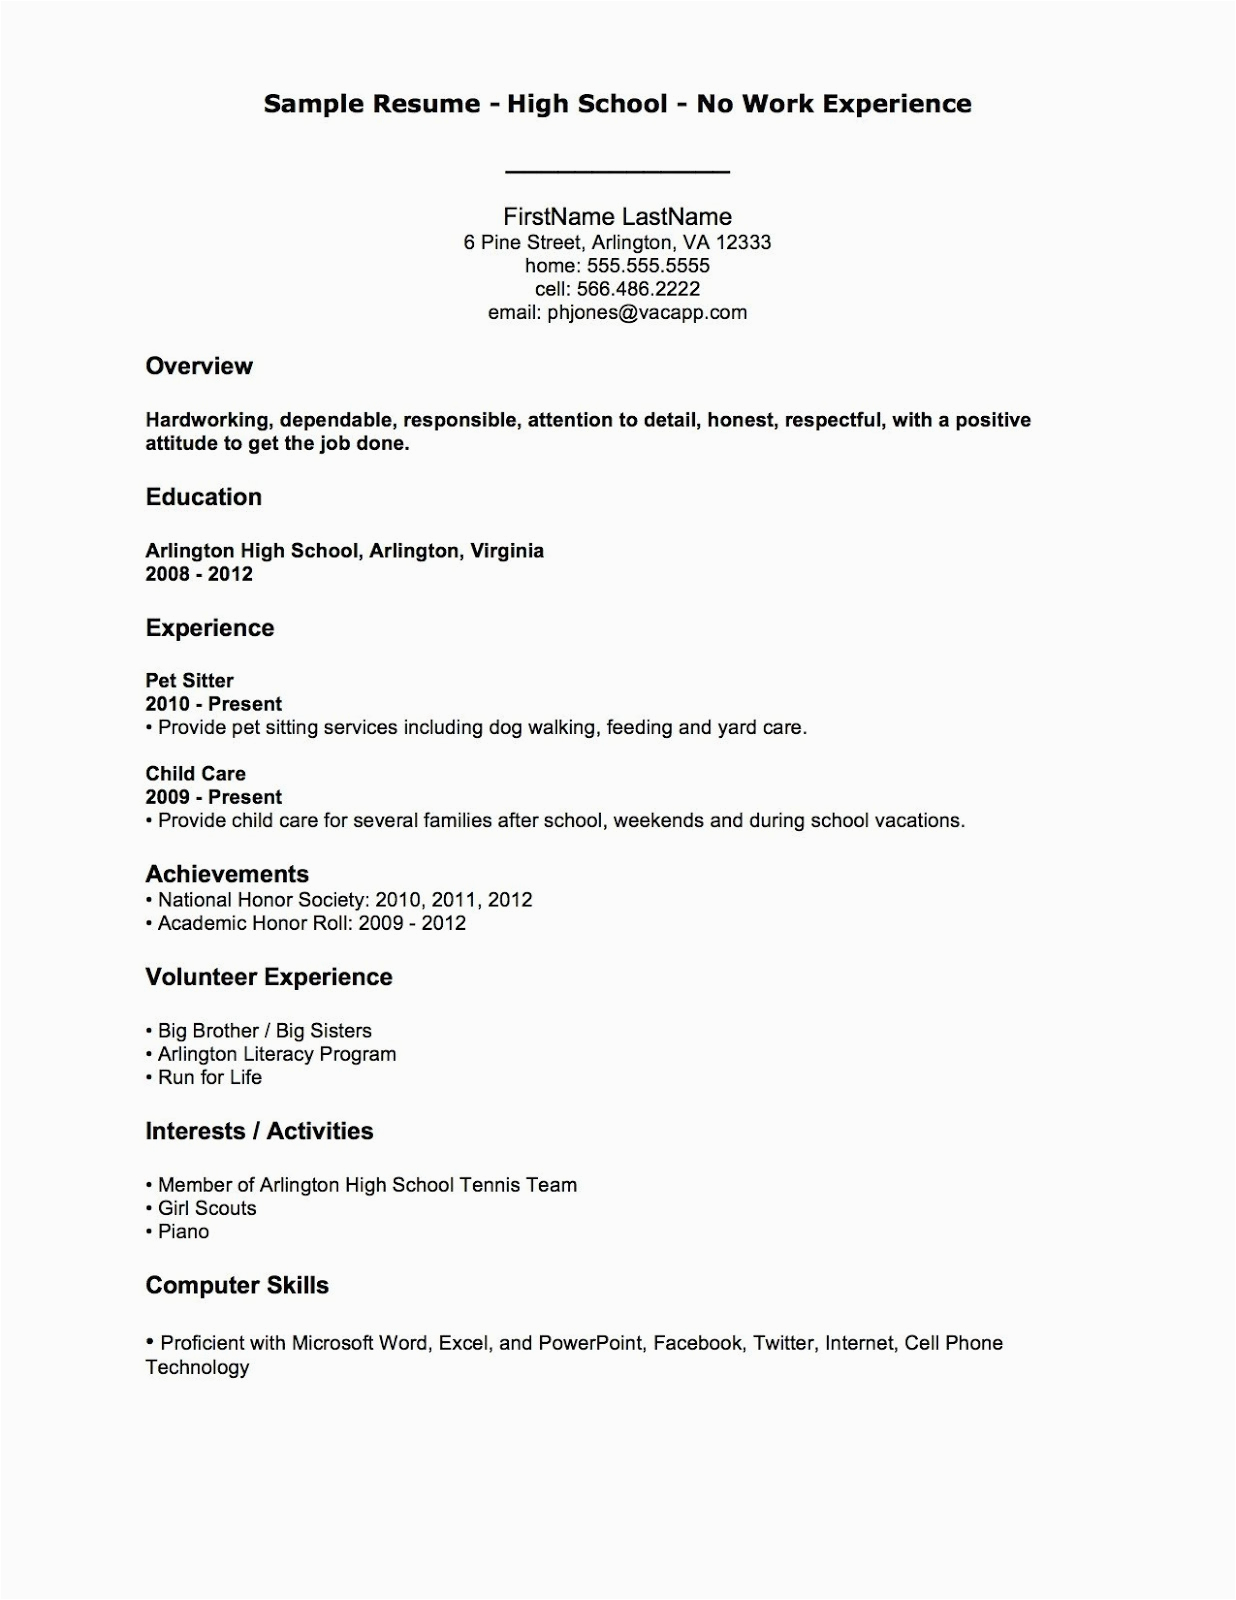 Sample Resume with Only One Job Experience Resume format E Job Resume format